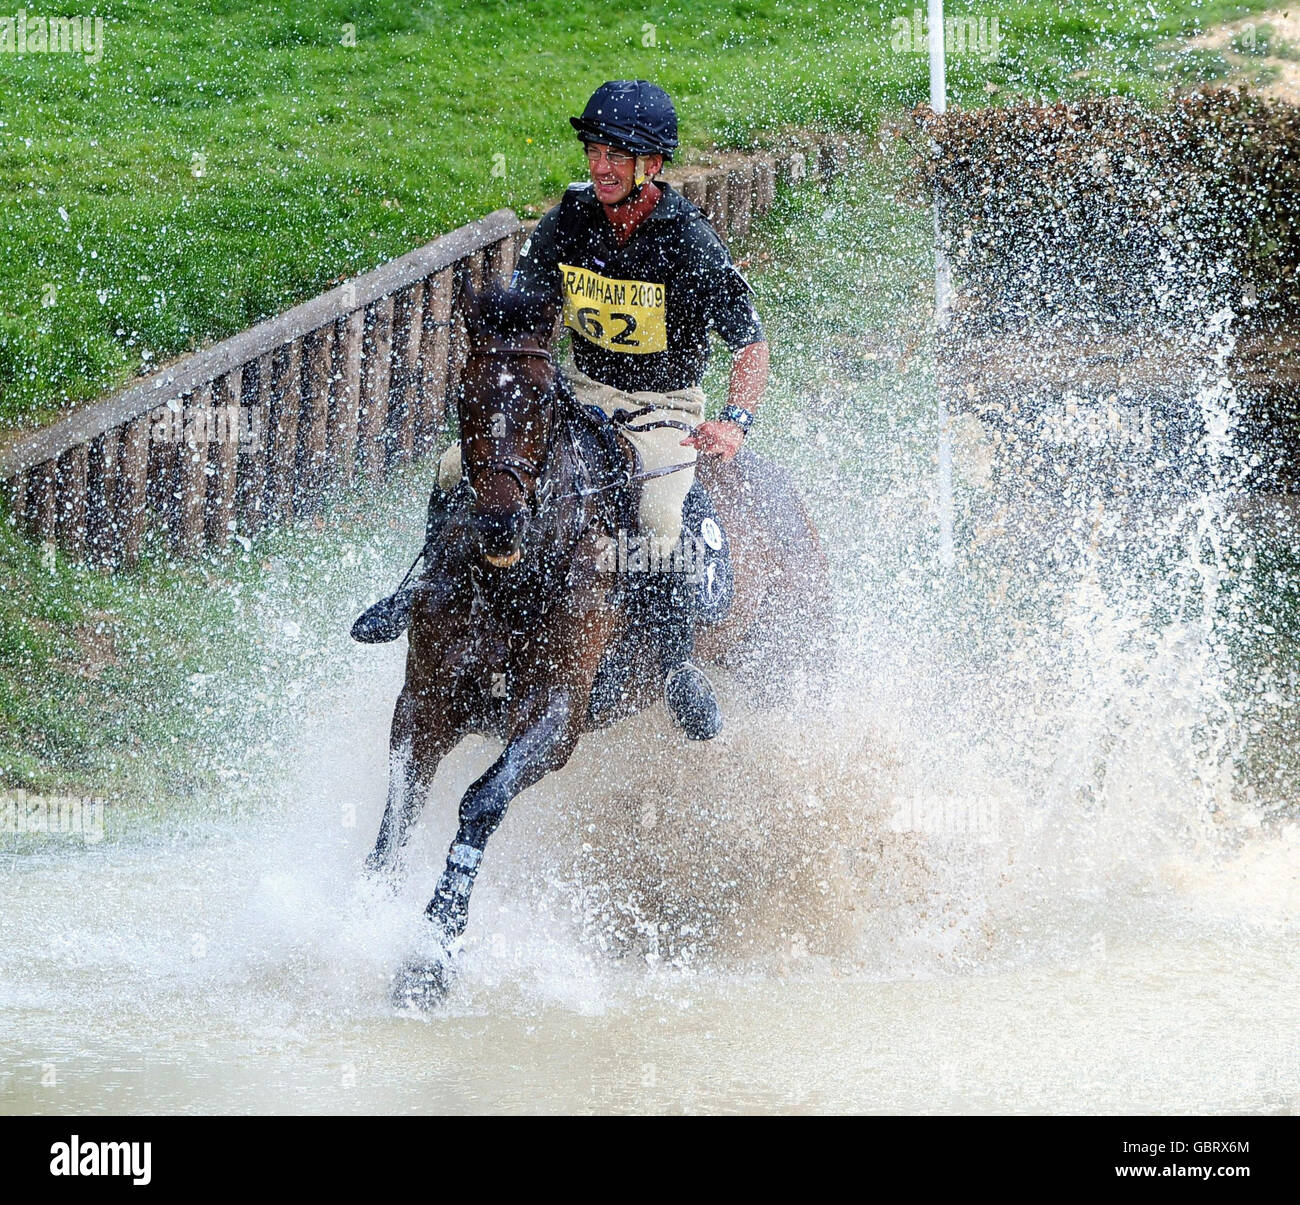 New Zealand's Andrew Nicholson riding The Light Fandango at the water jump on the Cross Country Course during the Bramham International Horse Trials at Bramham Park, Yorkshire. Stock Photo